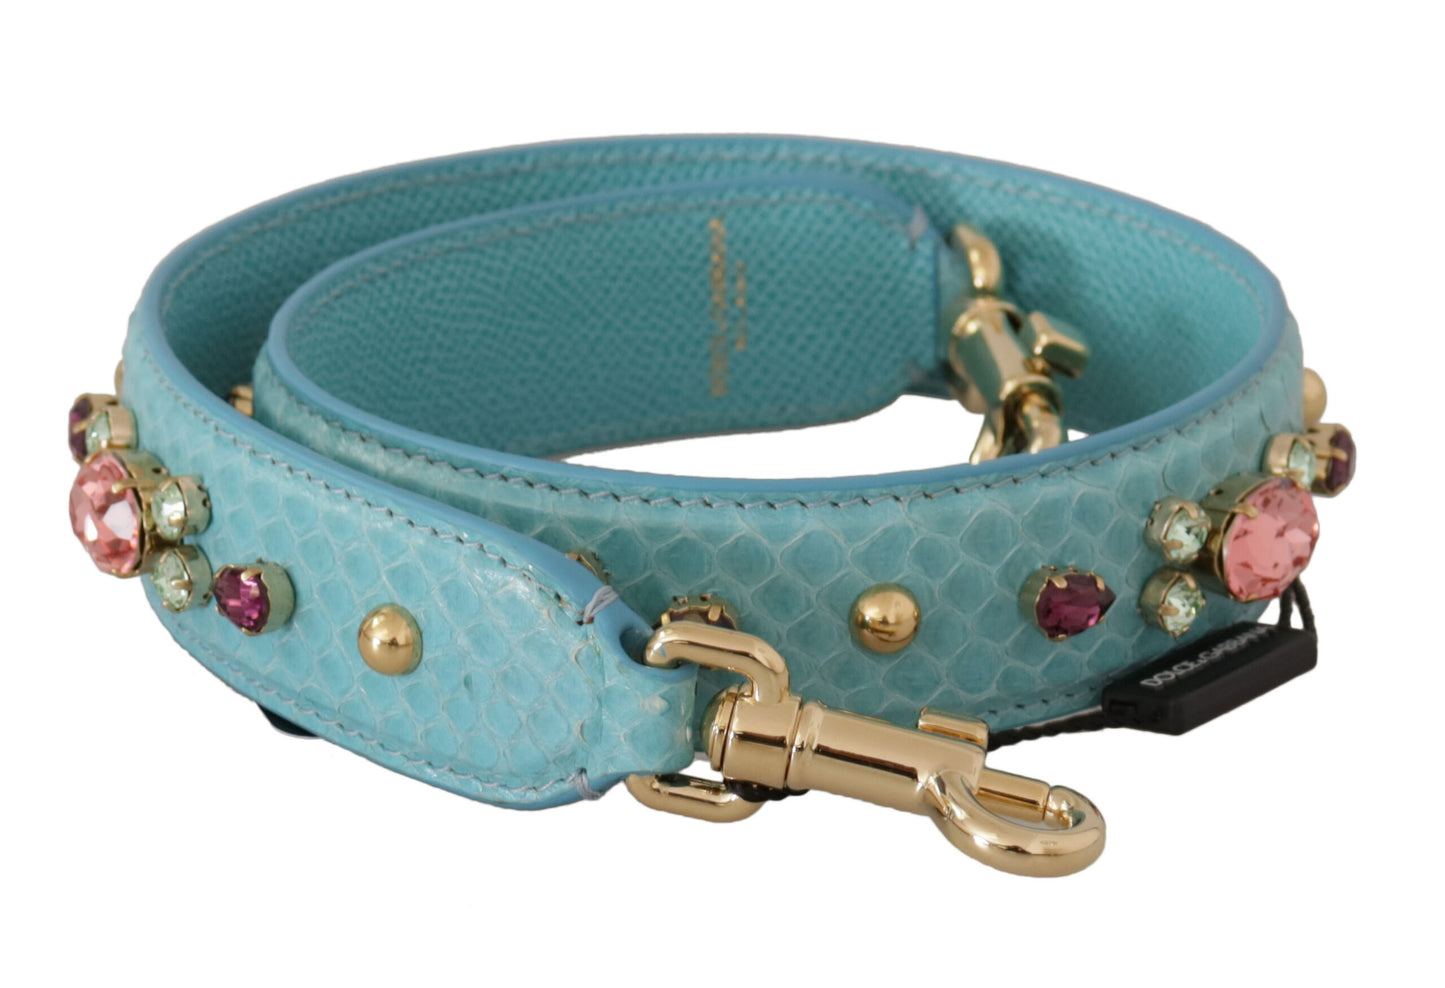 Elegant Blue Leather Bag Strap with Gold Accents